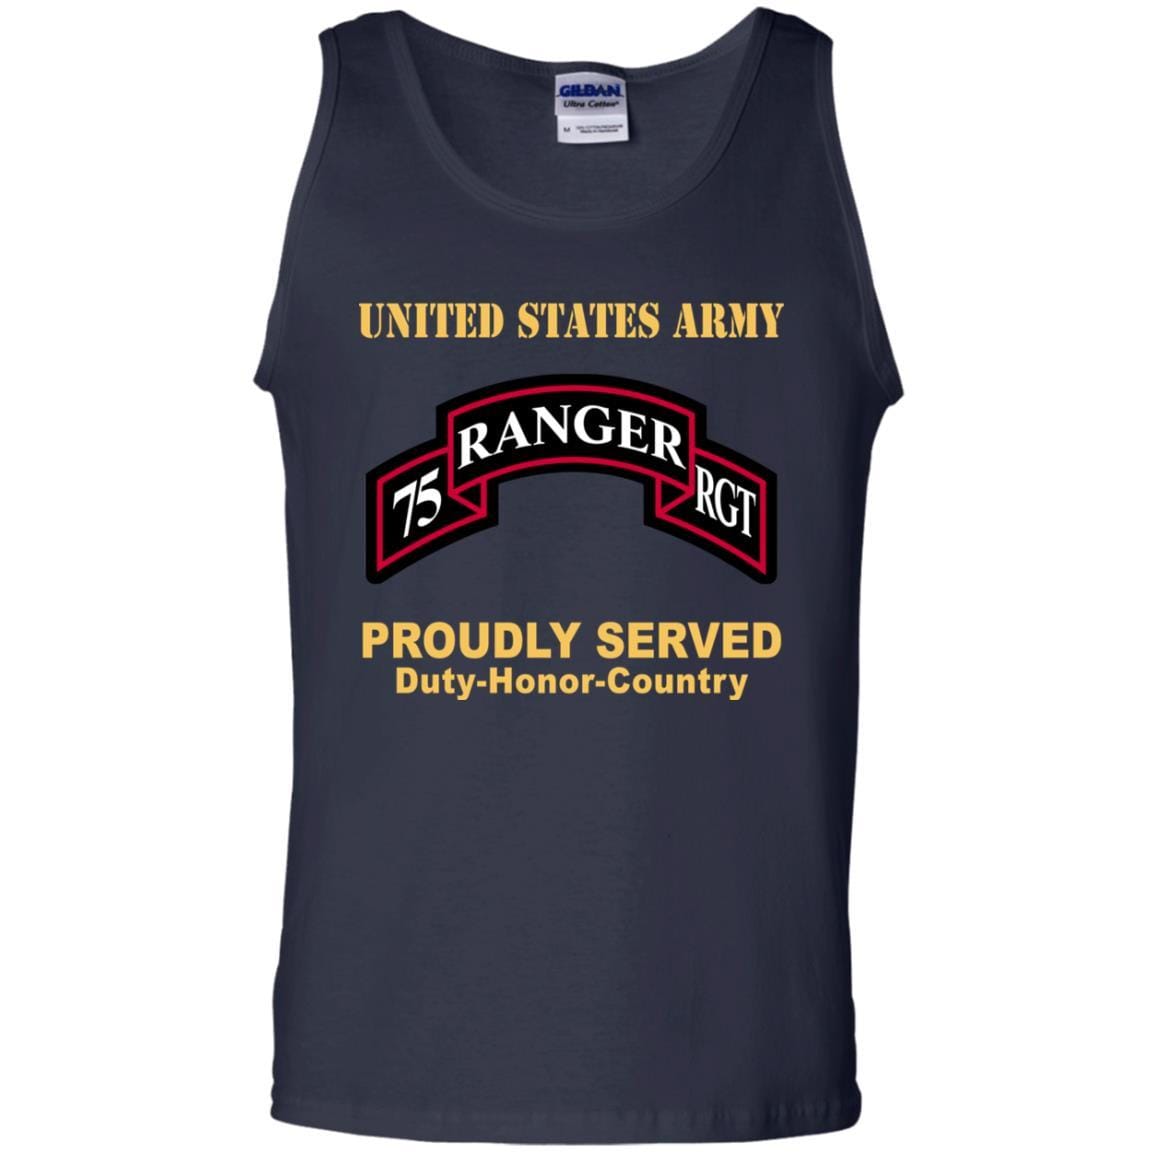 US ARMY 75TH RANGER REGIMENT - Proudly Served T-Shirt On Front For Men-TShirt-Army-Veterans Nation